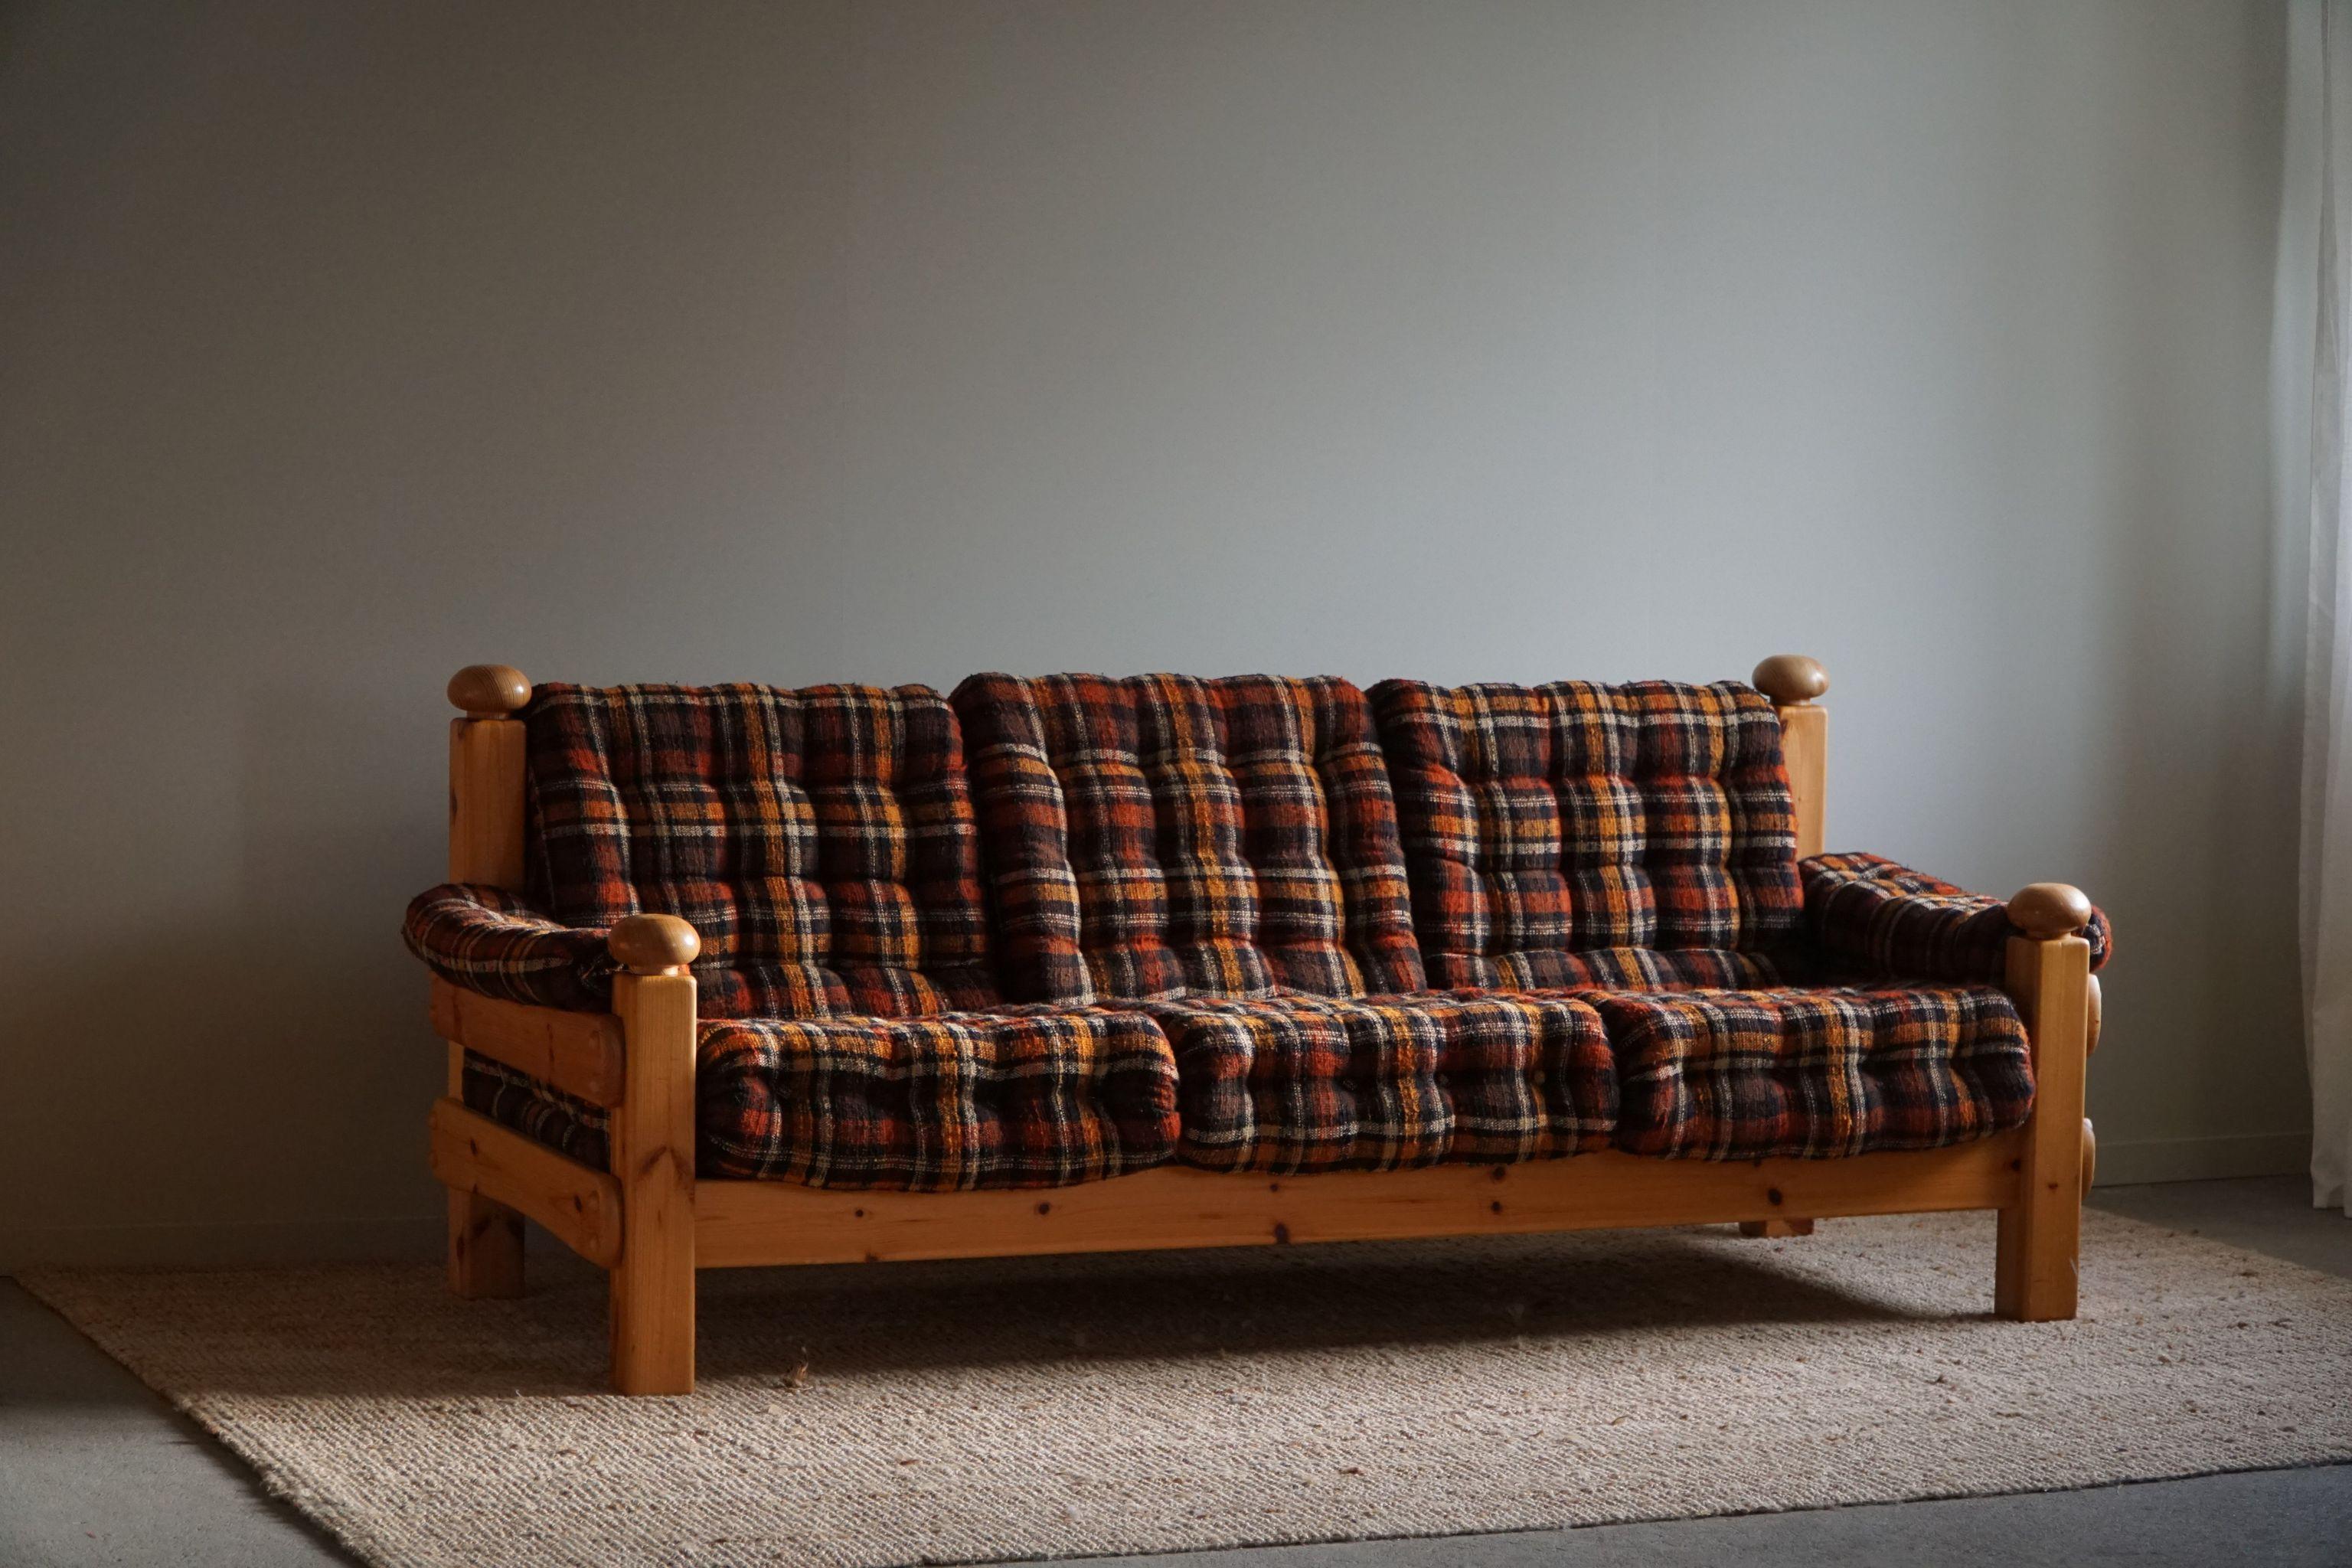 Three Seater Brutalist Sofa in Solid Pine, Swedish Modern, Made in the 1970s For Sale 13